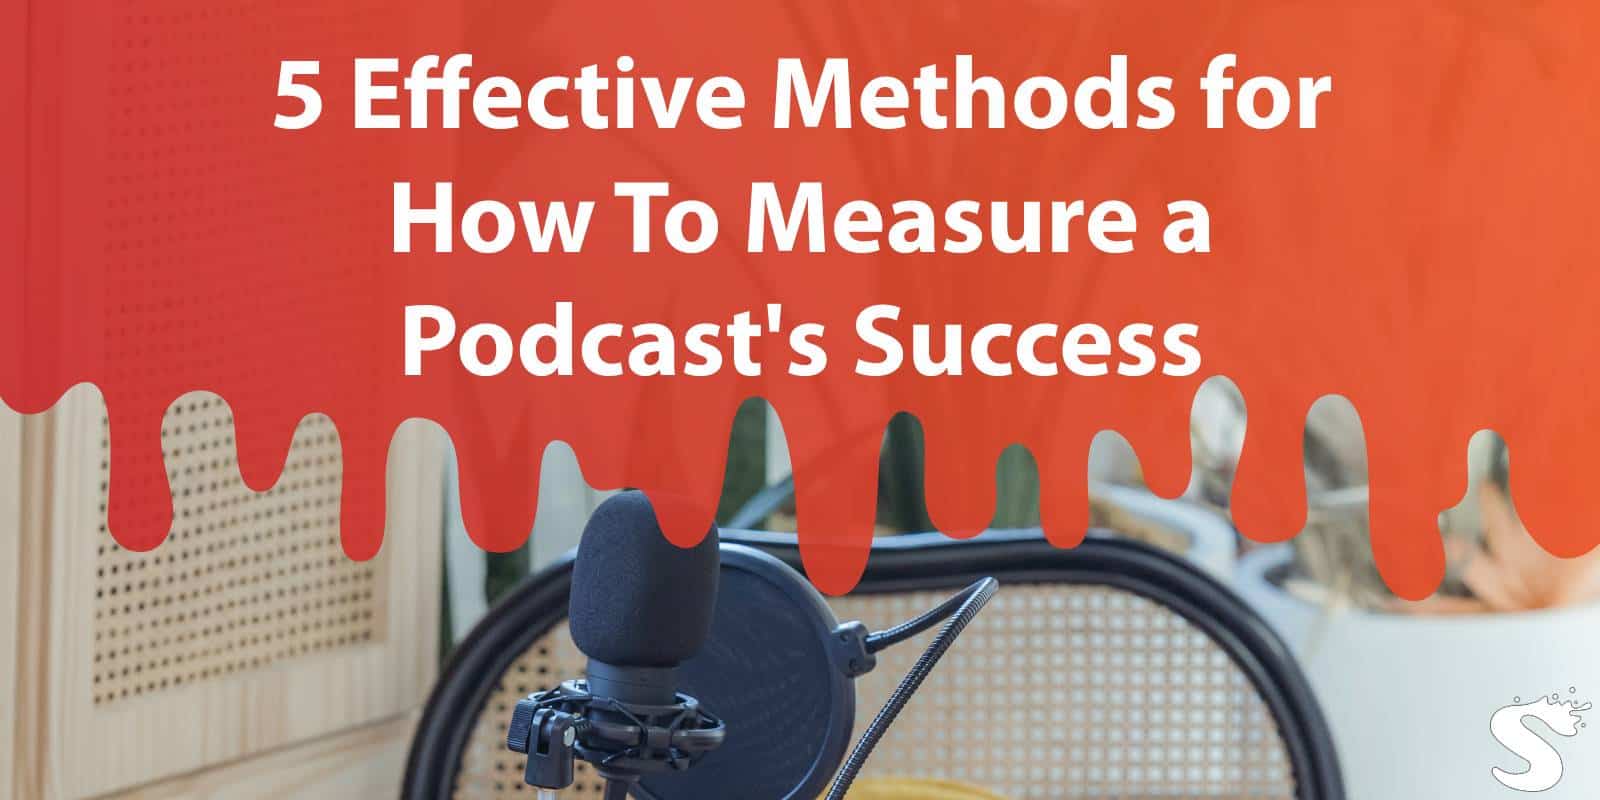 5 Effective Methods for How To Measure a Podcast's Success